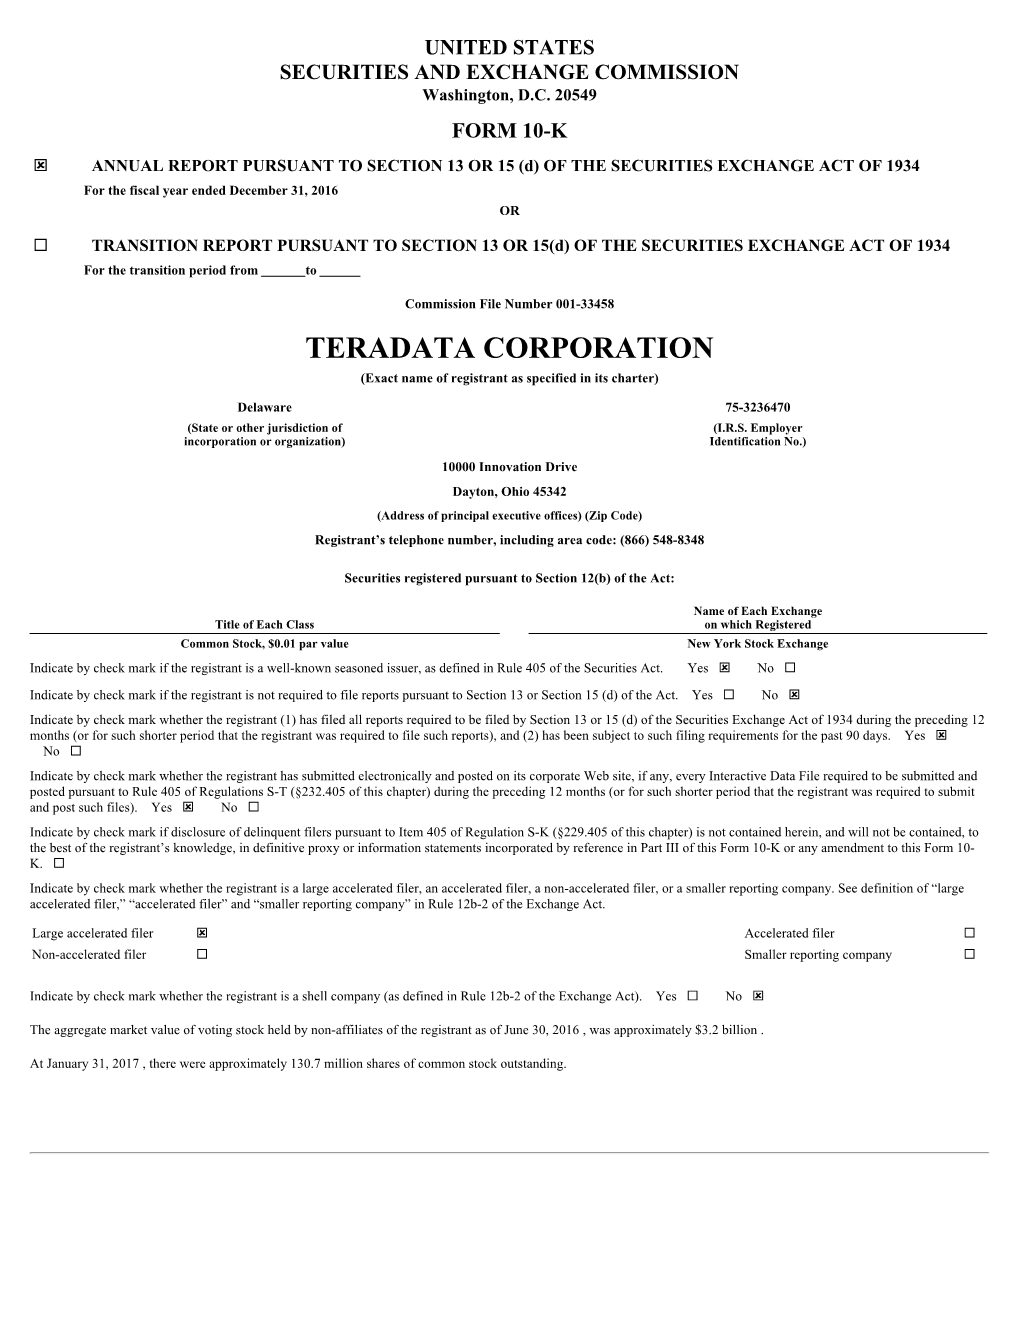 TERADATA CORPORATION (Exact Name of Registrant As Specified in Its Charter)